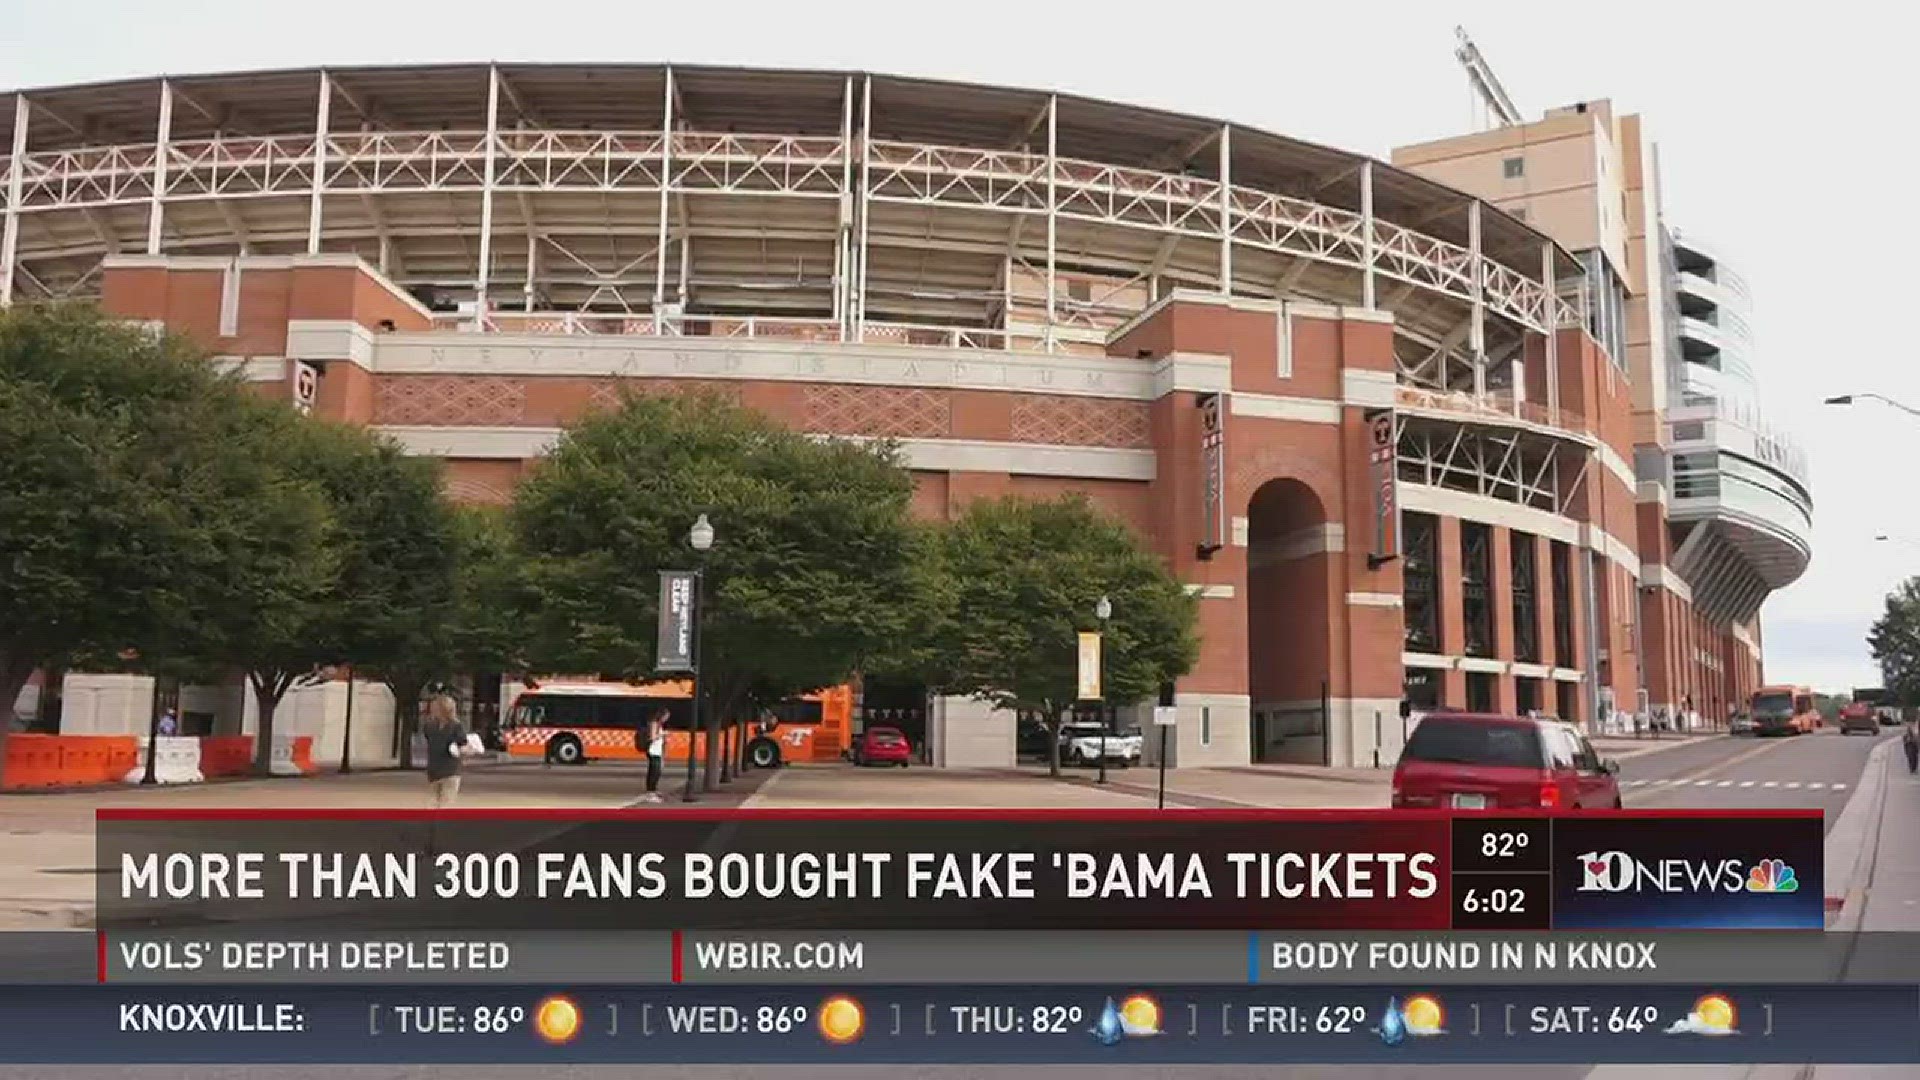 Oct. 17, 2016: UT's ticket office says more than 300 people purchased counterfeit tickets for UT's game against Alabama.